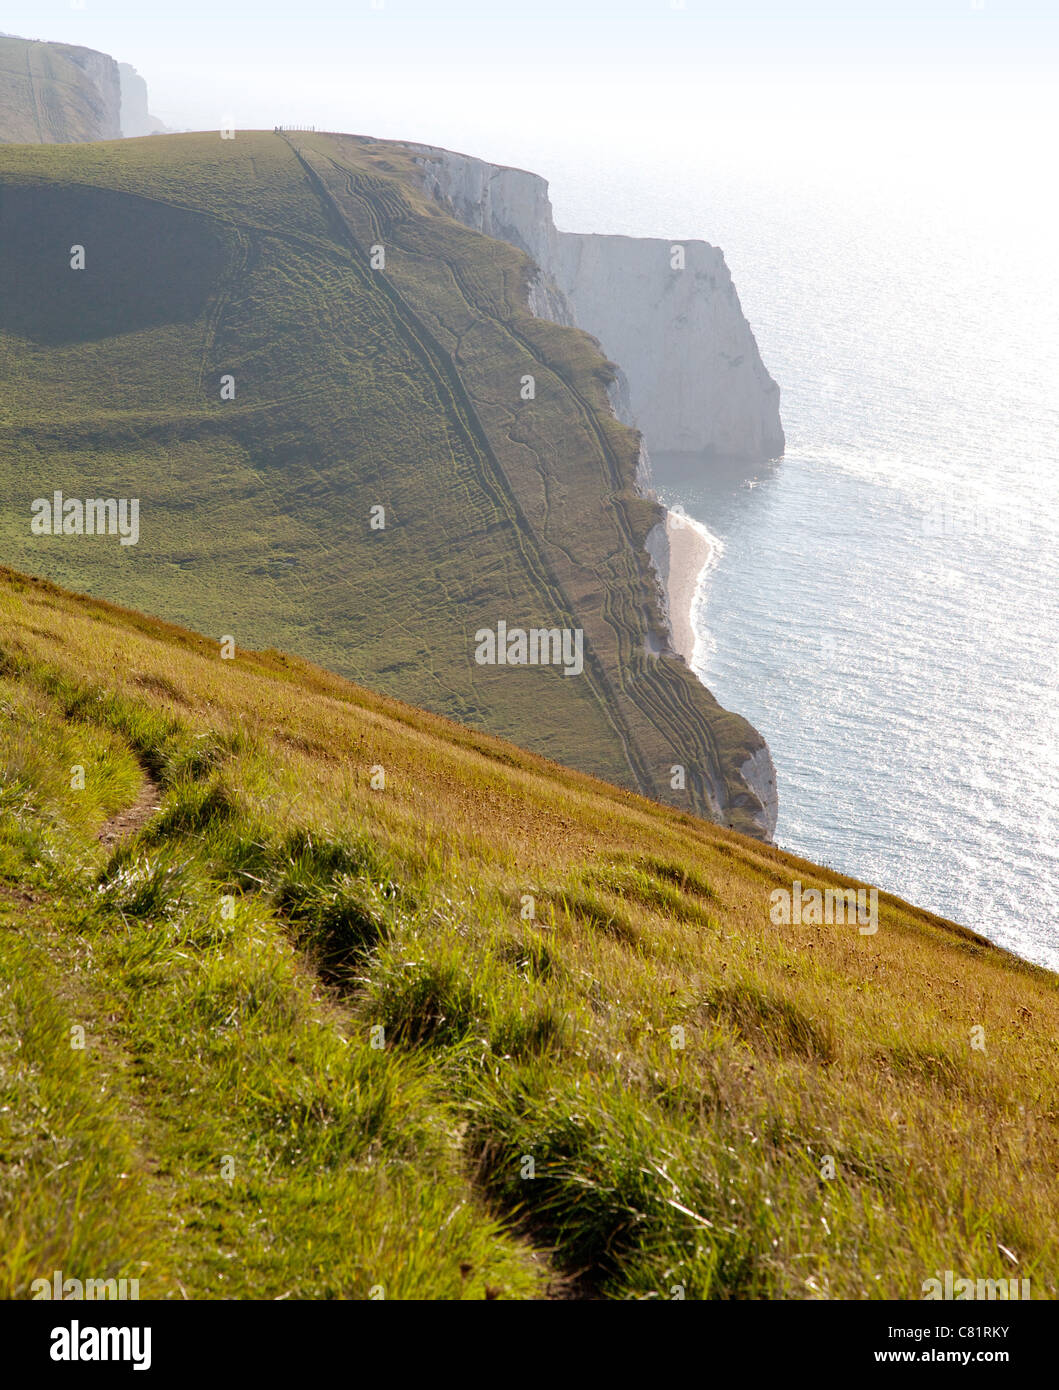 Chalk cliffs at Swyre Head near Durdle Door and Lulworth Cove in Dorset showing the South West Coast path along the cliff edge Stock Photo